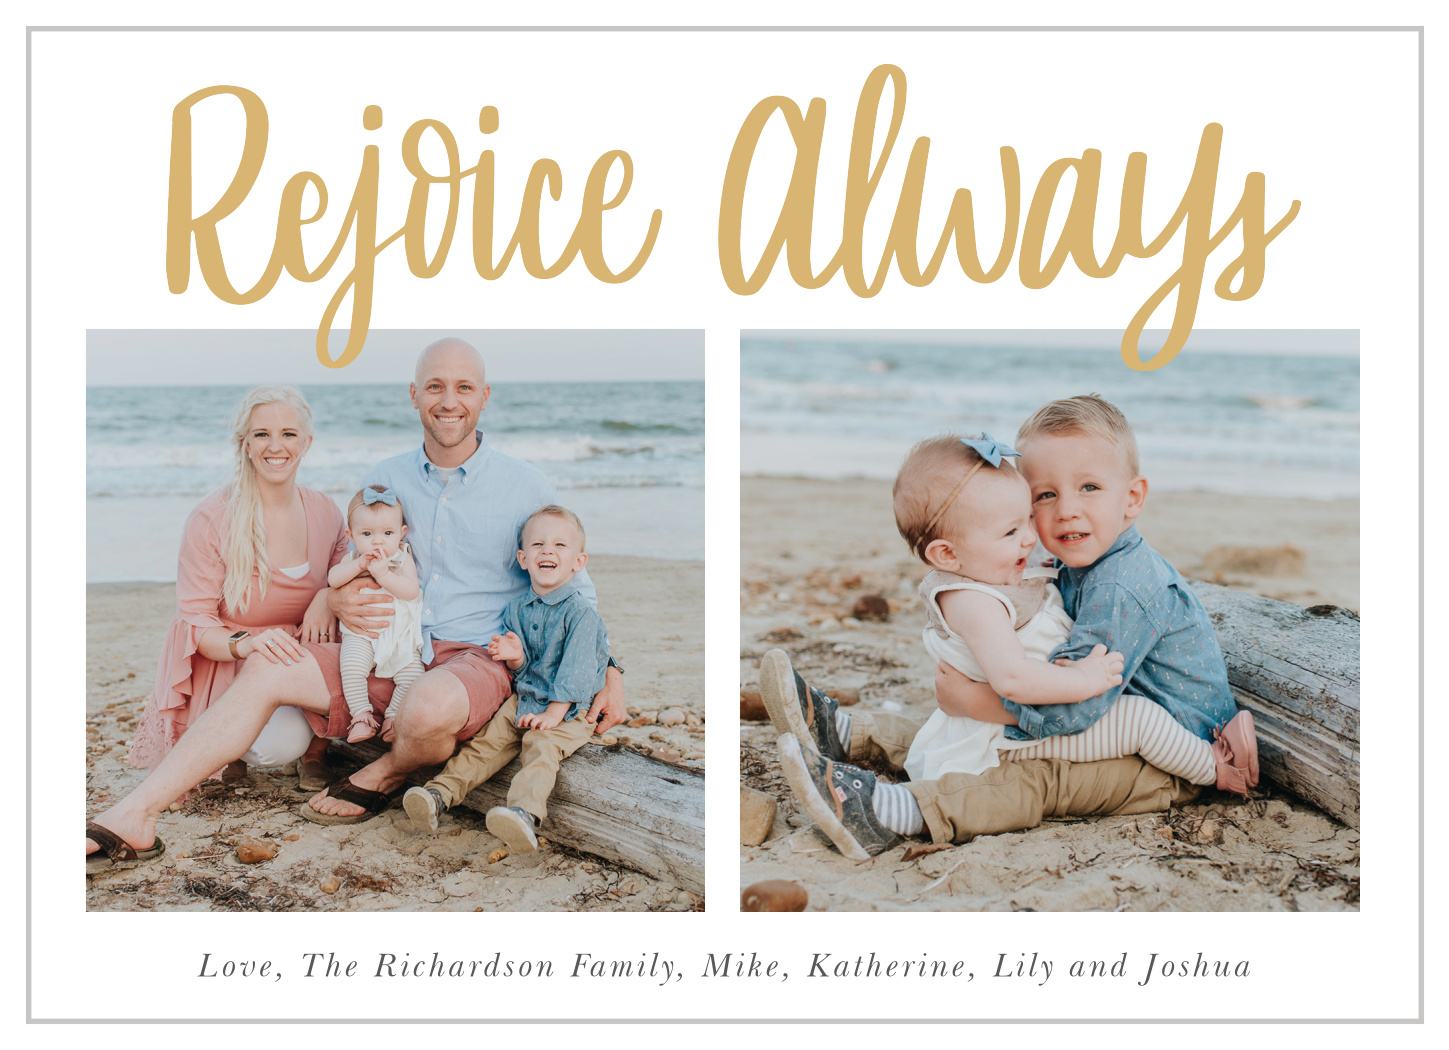 Rejoice Always Holiday Cards